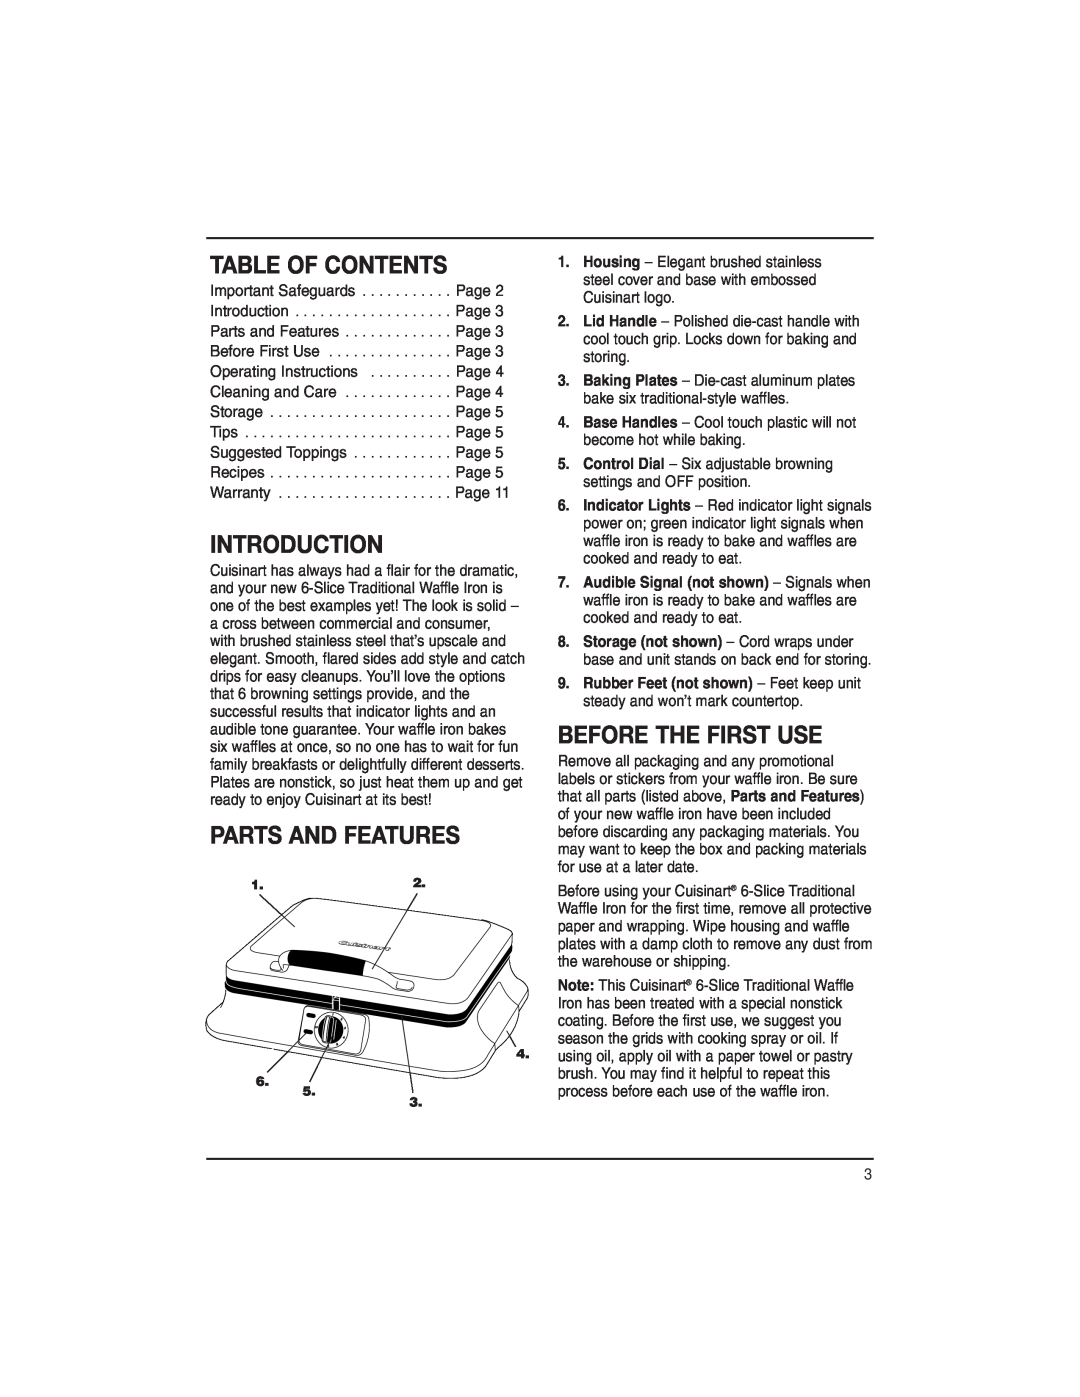 Cuisinart WAF-6C manual Table Of Contents, Introduction, Parts And Features, Before The First Use 